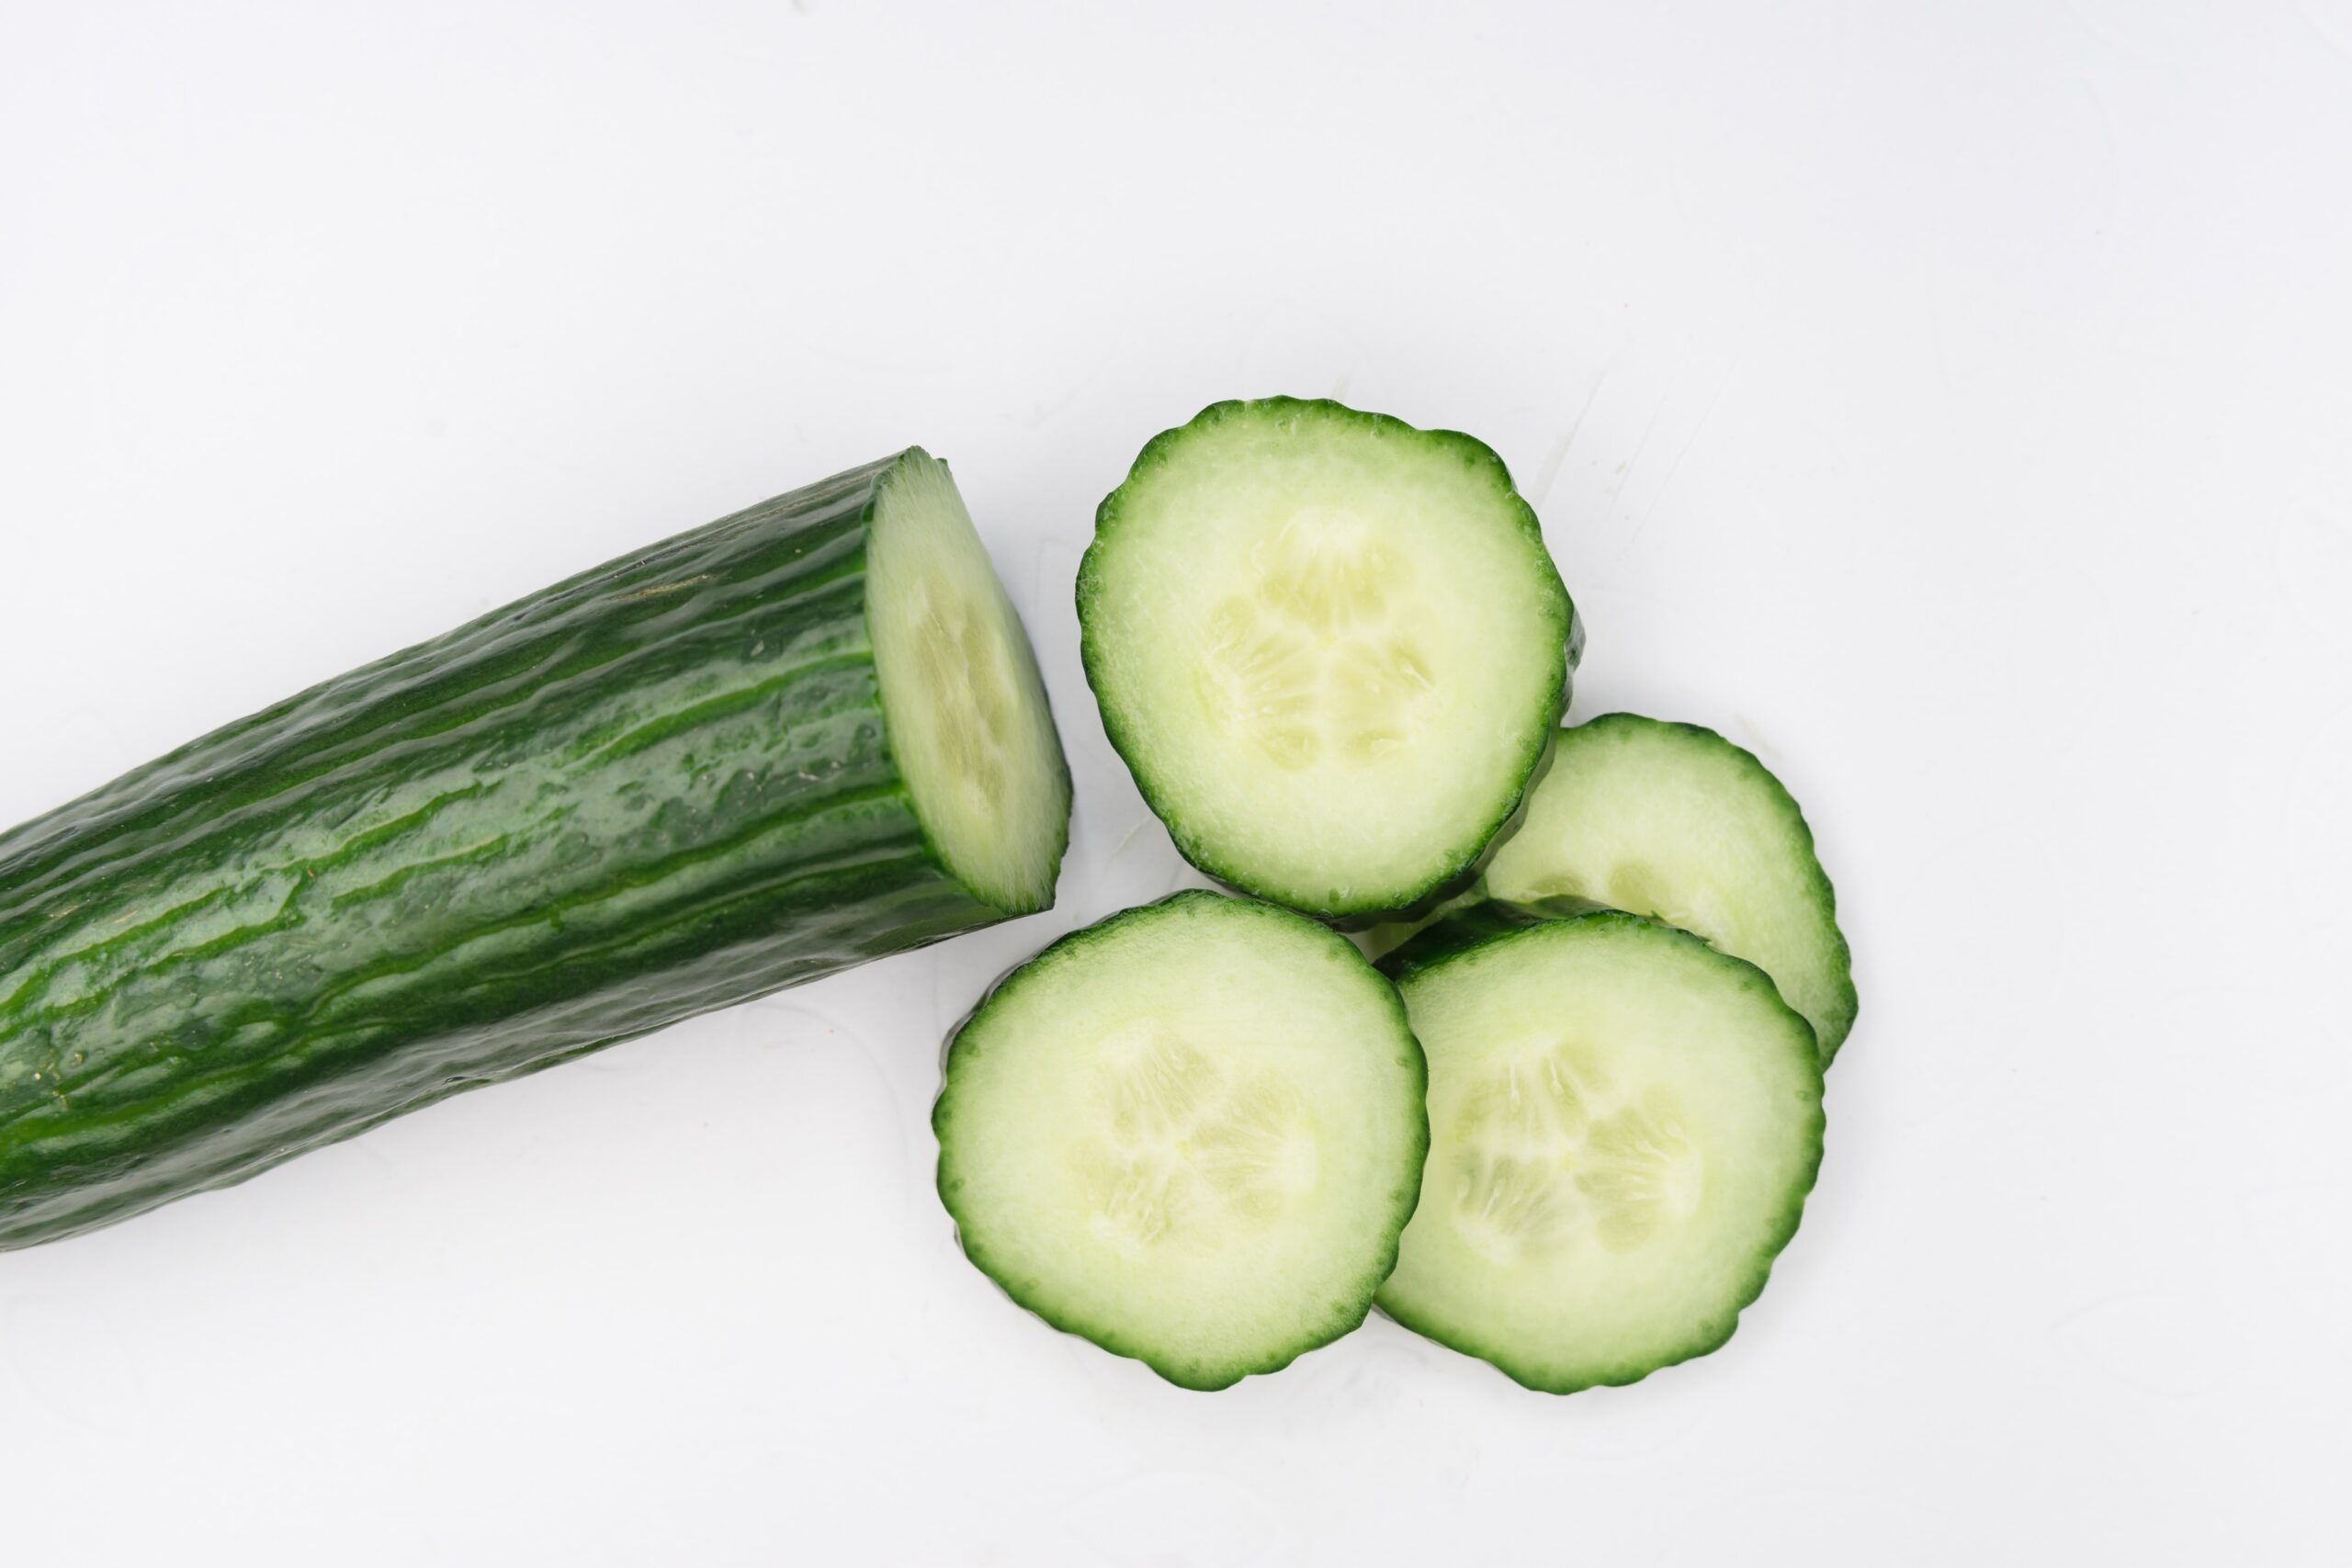 Is Cucumber Good For Weight Loss? - Weight Loss Made Practical